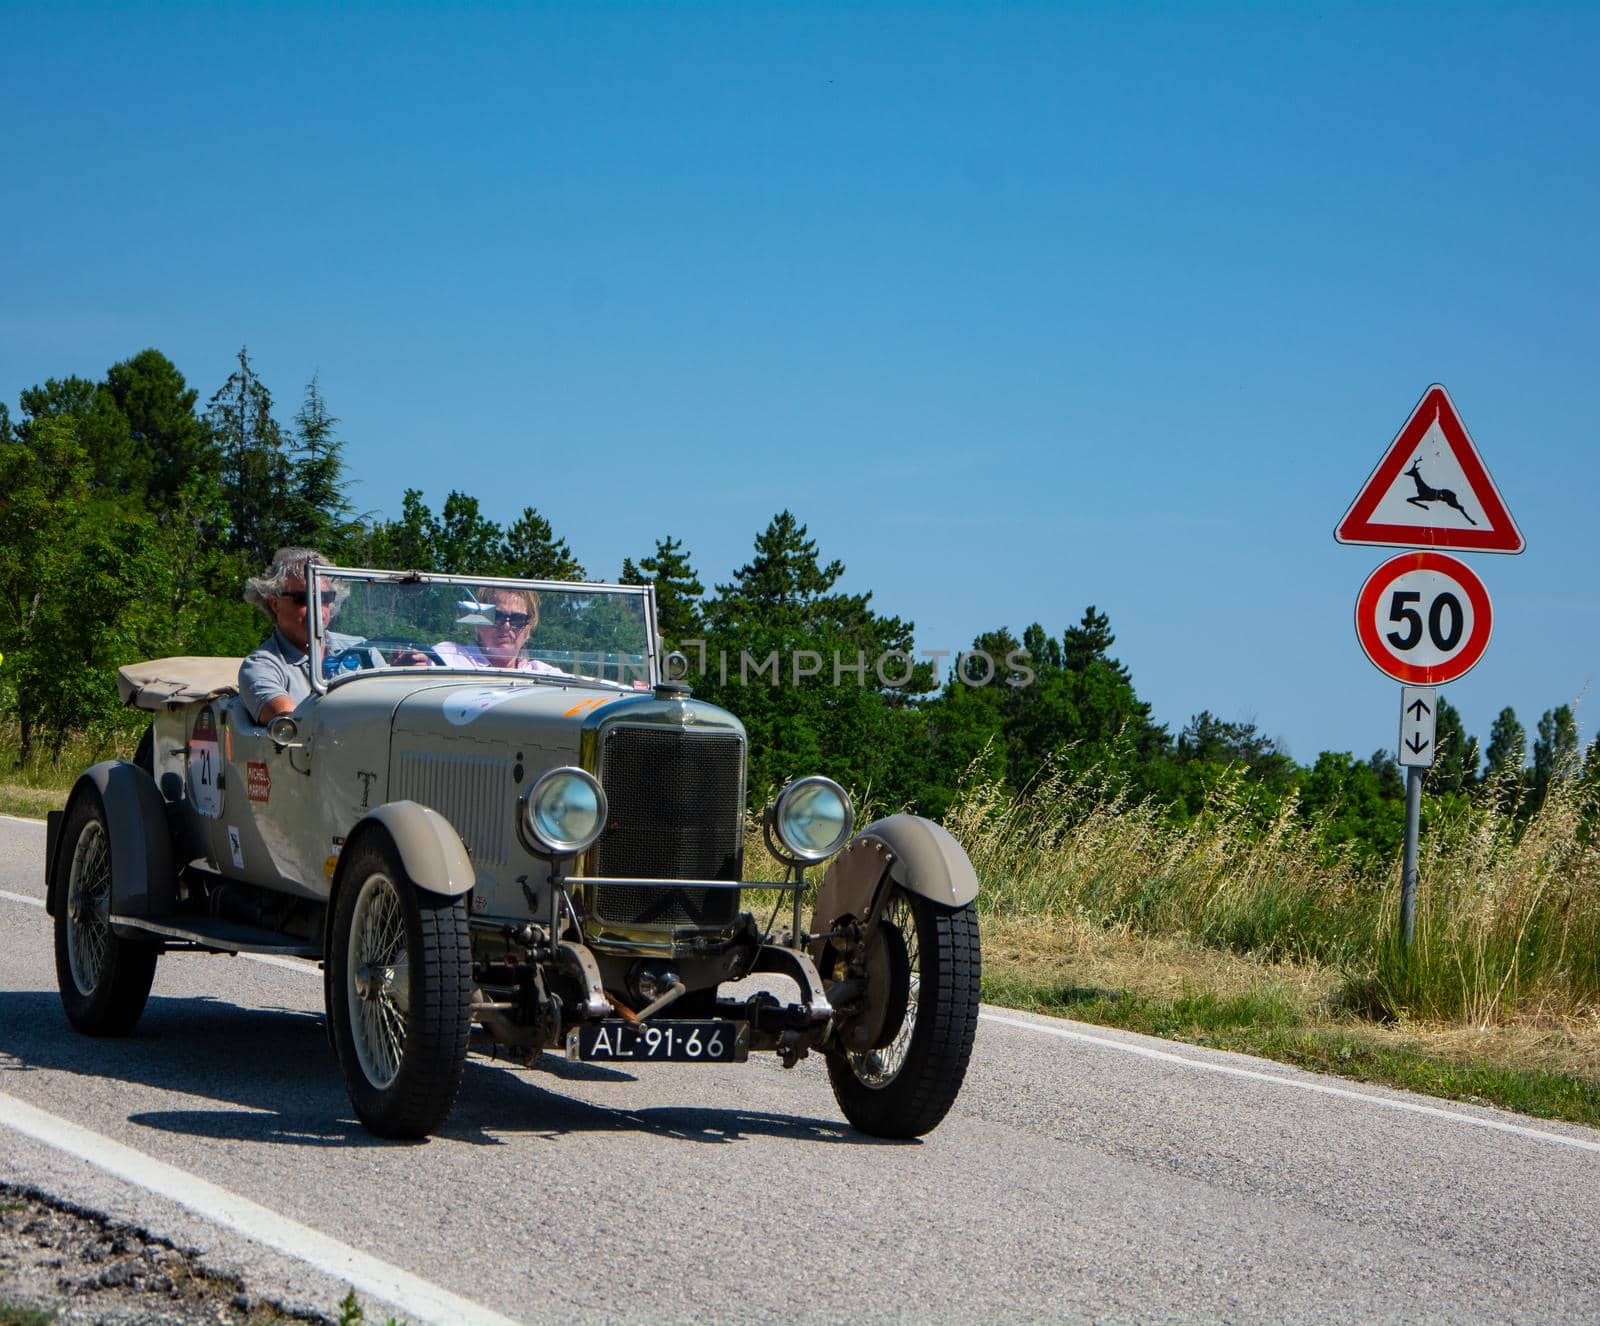 URBINO, ITALY - JUN 16 - 2022 : SUNBEAM 3 LITRE TWIN CAM SUPER SPORT 1926 on an old racing car in rally Mille Miglia 2022 the famous italian historical race (1927-1957